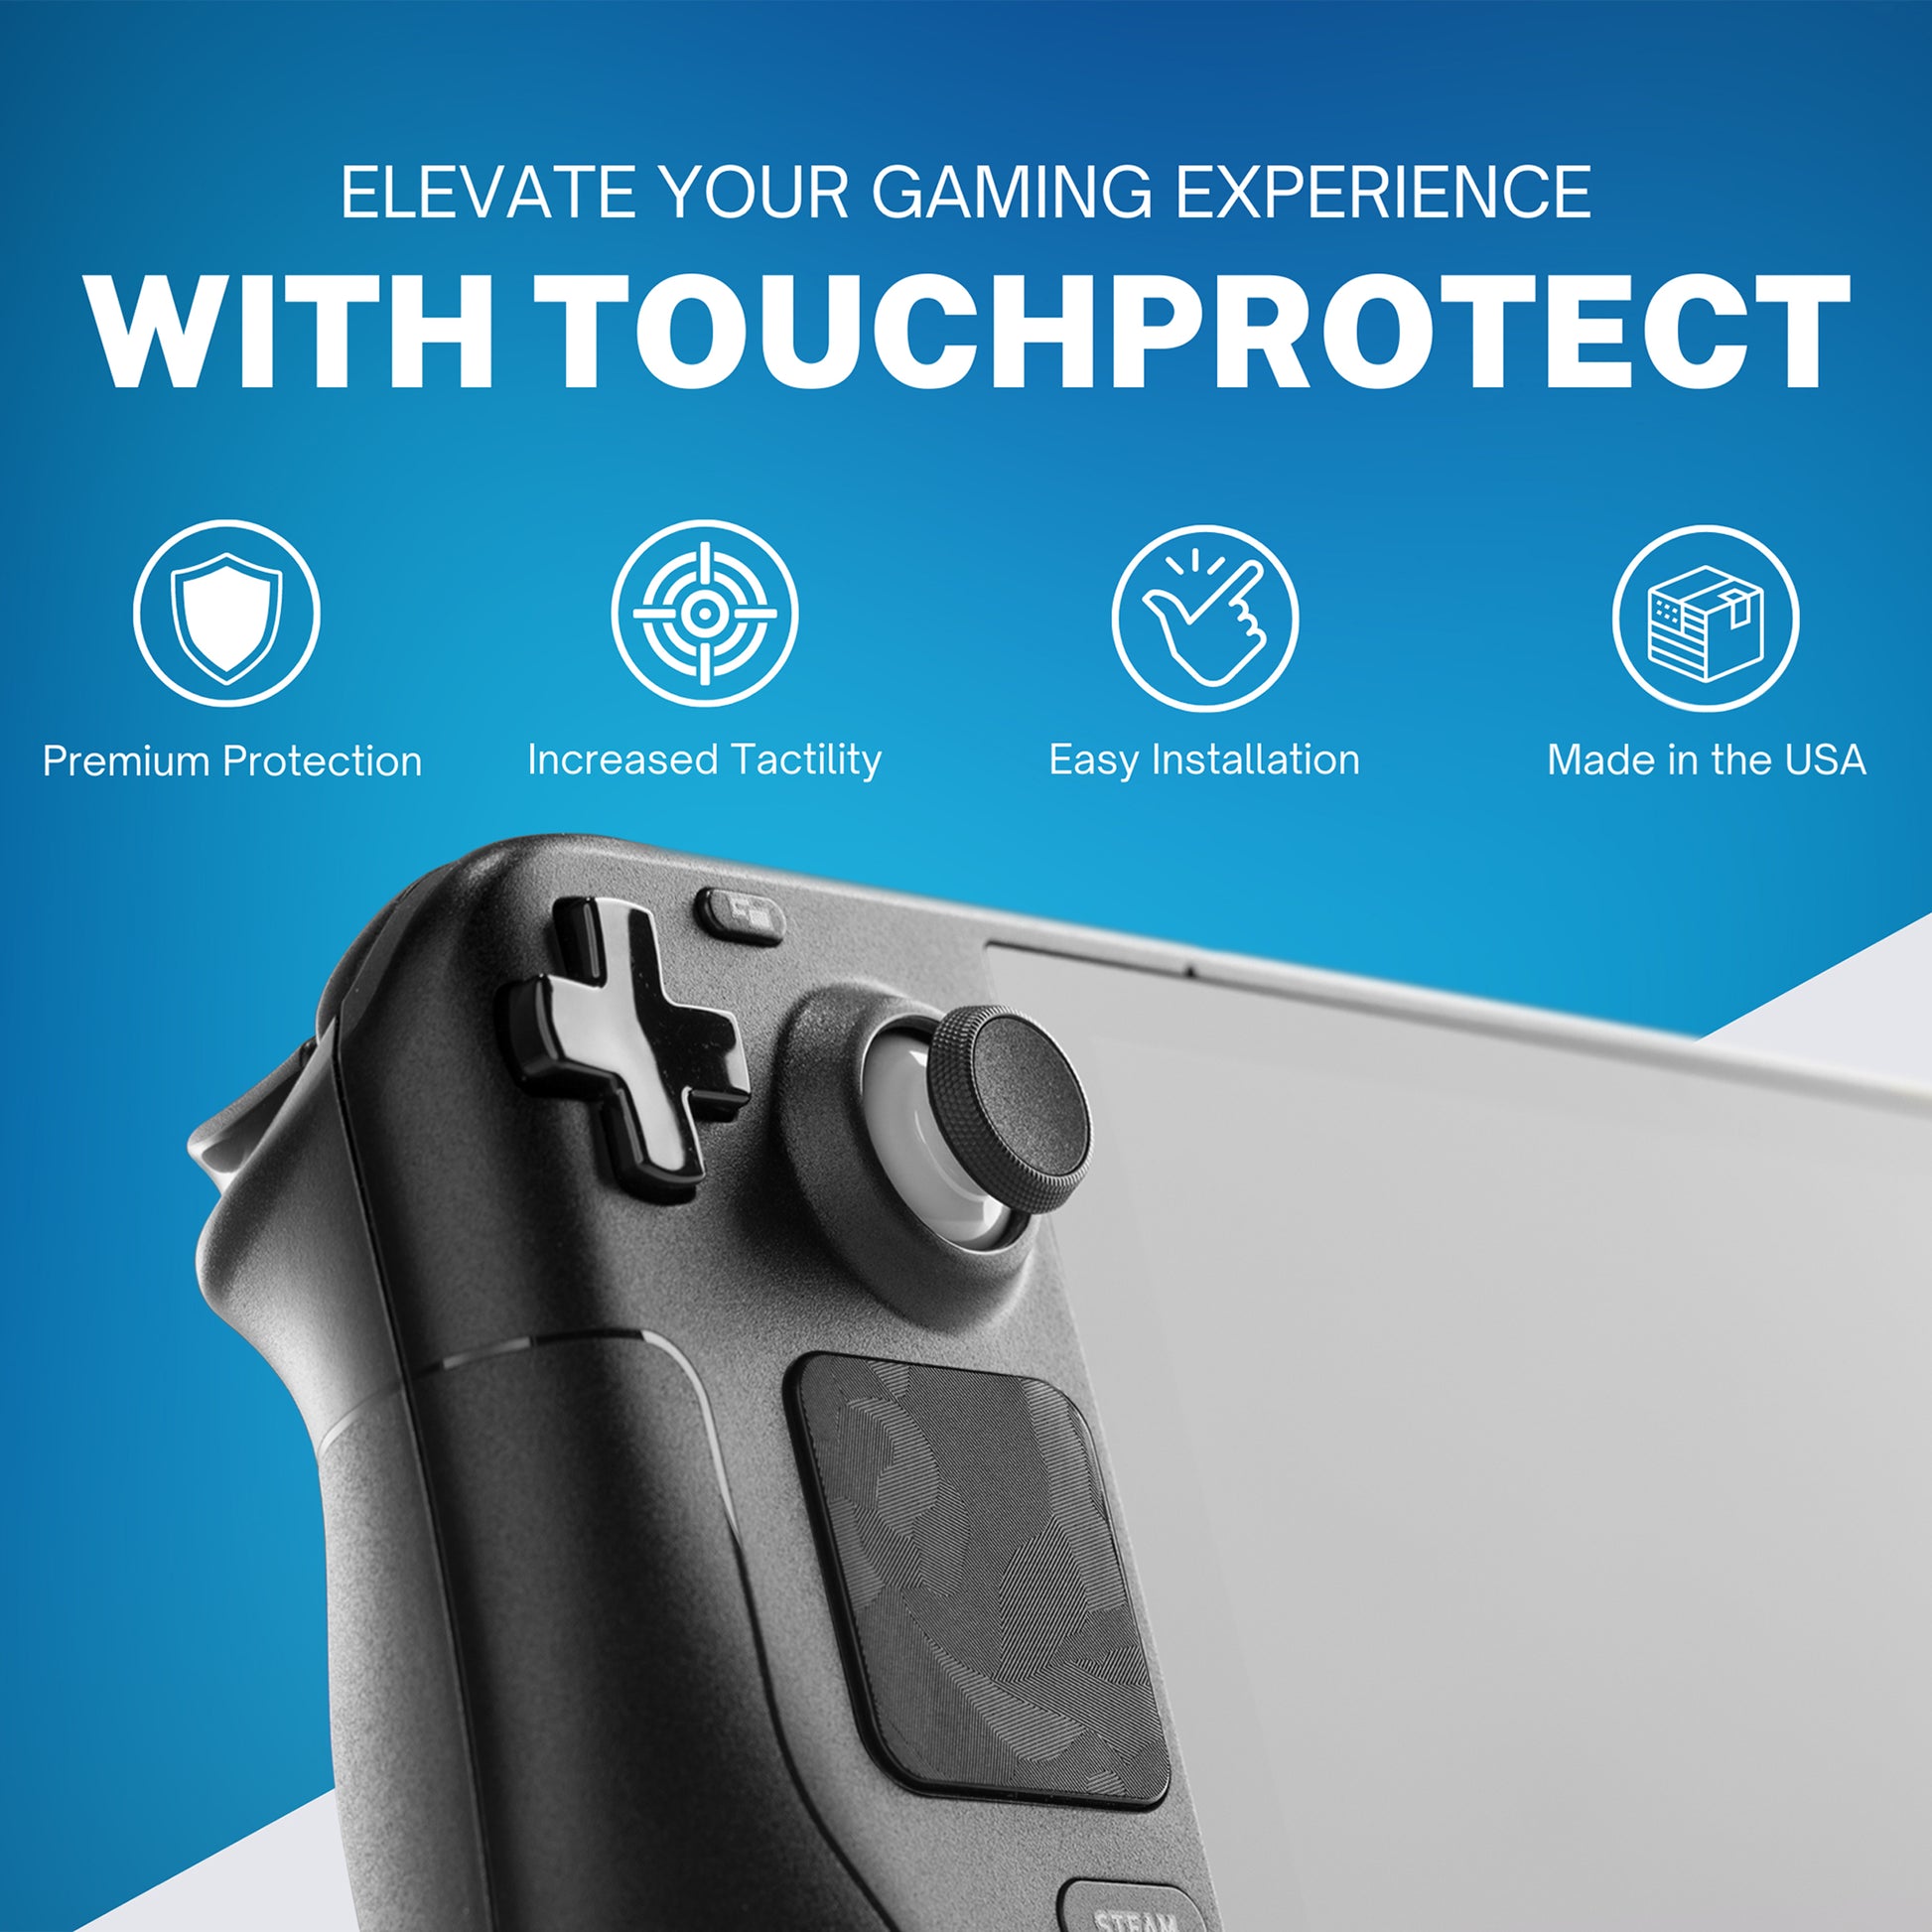 Infographic showing Touchprotect Features. Premium protection. Increased Tactility. Easy Installation. Made in the USA. 